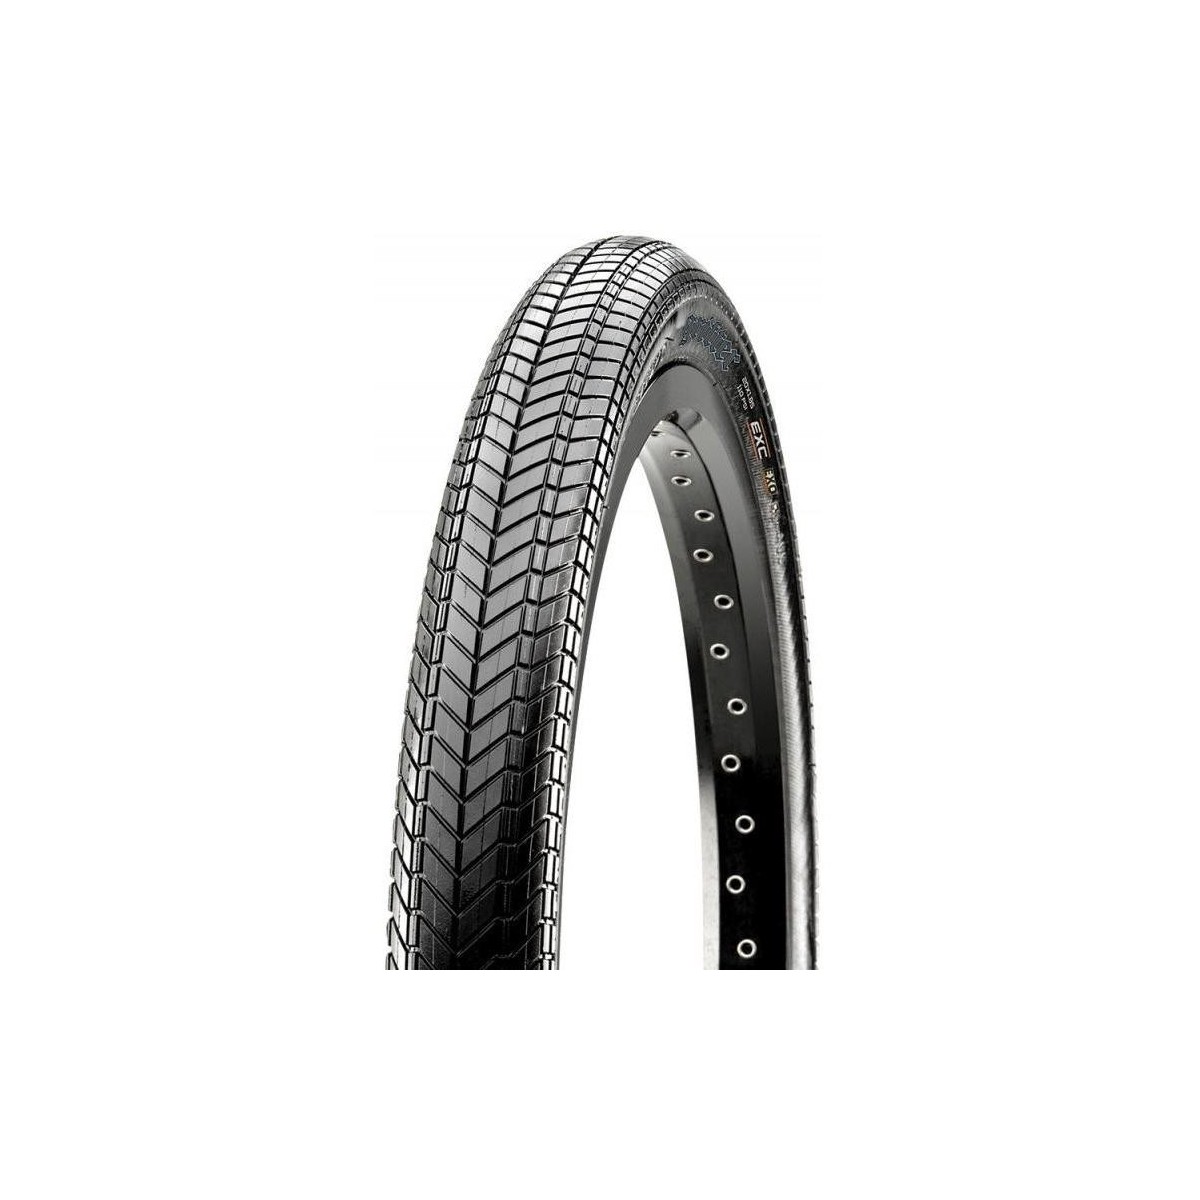 Riepas Maxxis Maxxis Grifter 20"